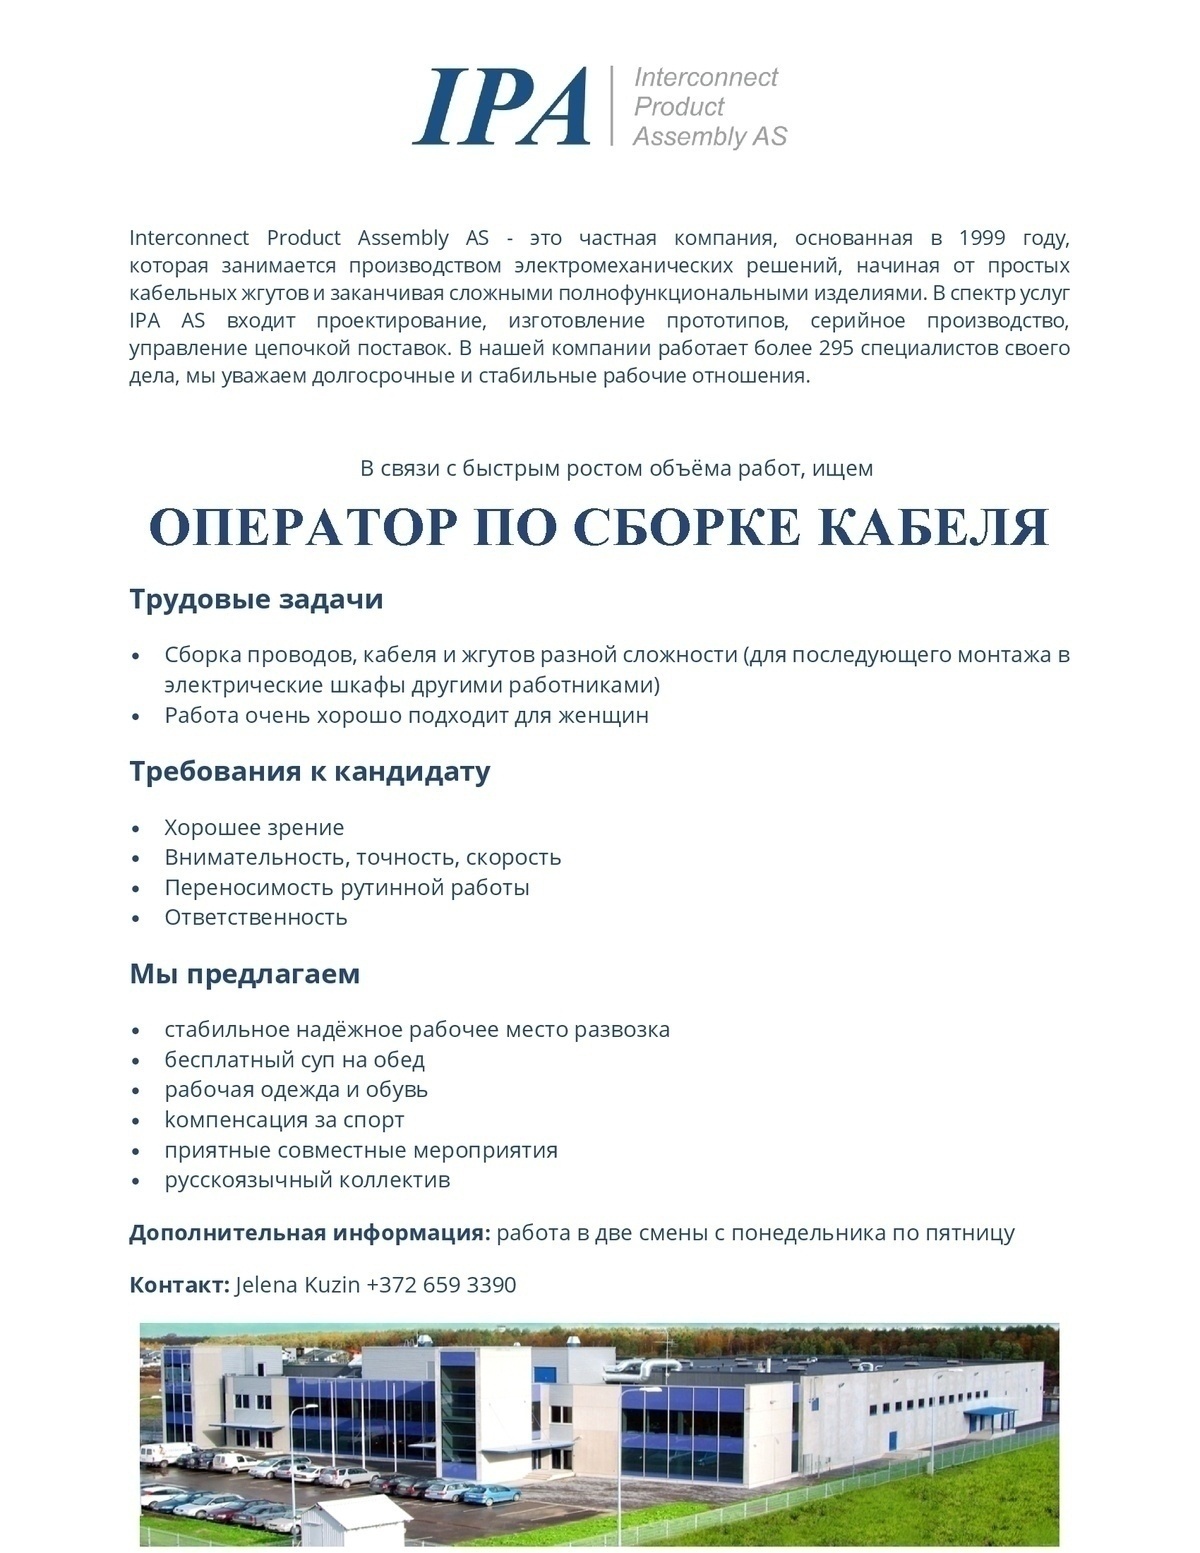 Interconnect Product Assembly AS ОПЕРАТОР ПО СБОРКЕ КАБЕЛЯ